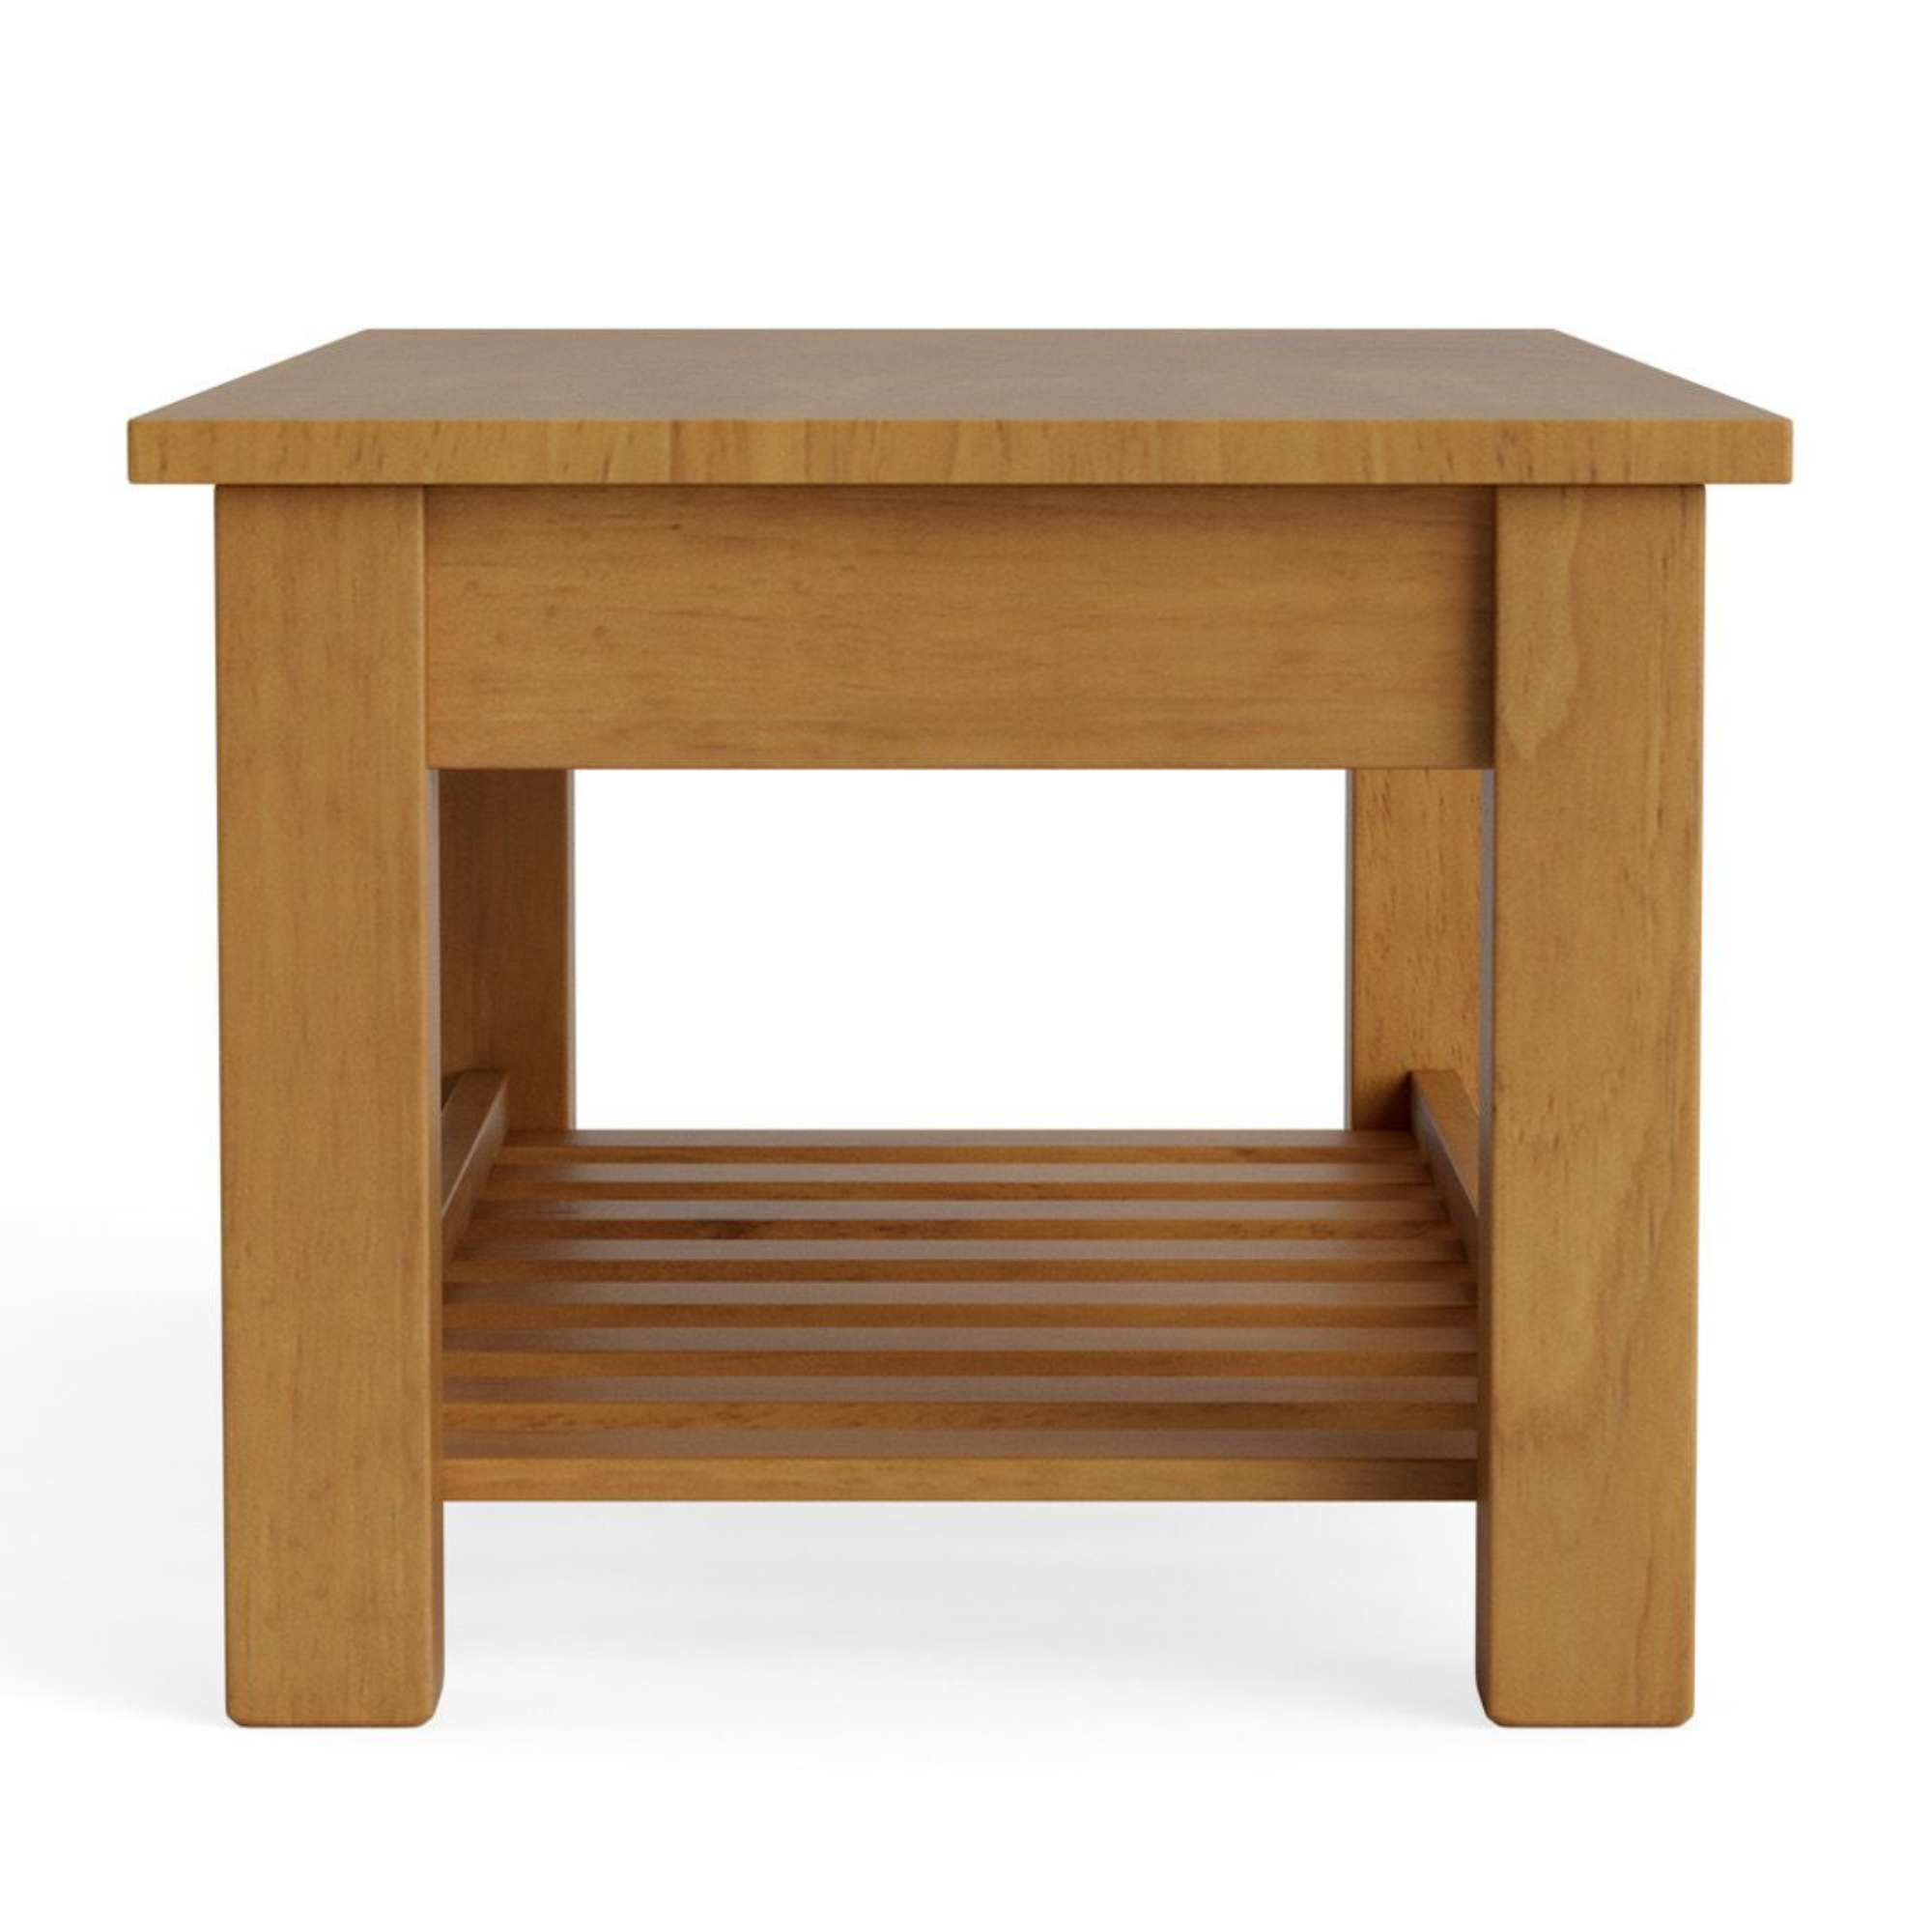 CHARLTON COFFEE TABLE WITH RACK AND DRAWER | NZ MADE